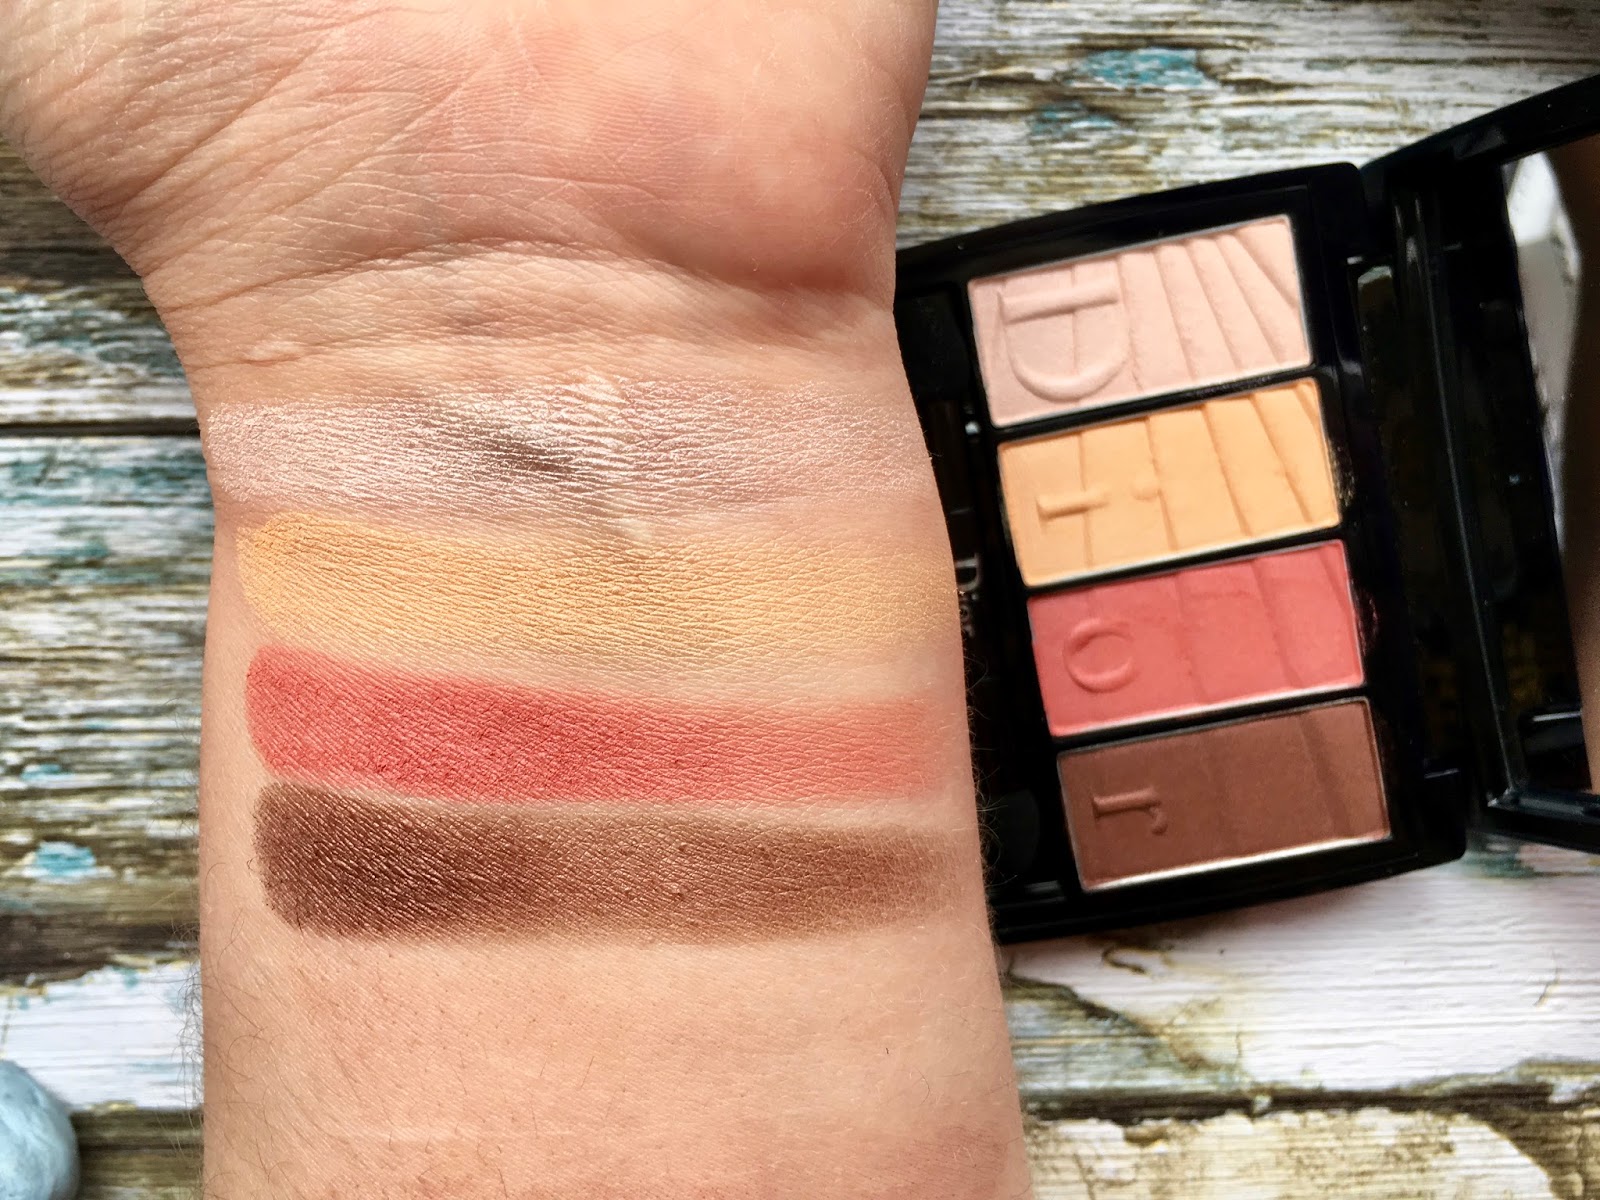 Dior 4 Colours Eyeshadow Graduation Coral Palette Review + Swatches 